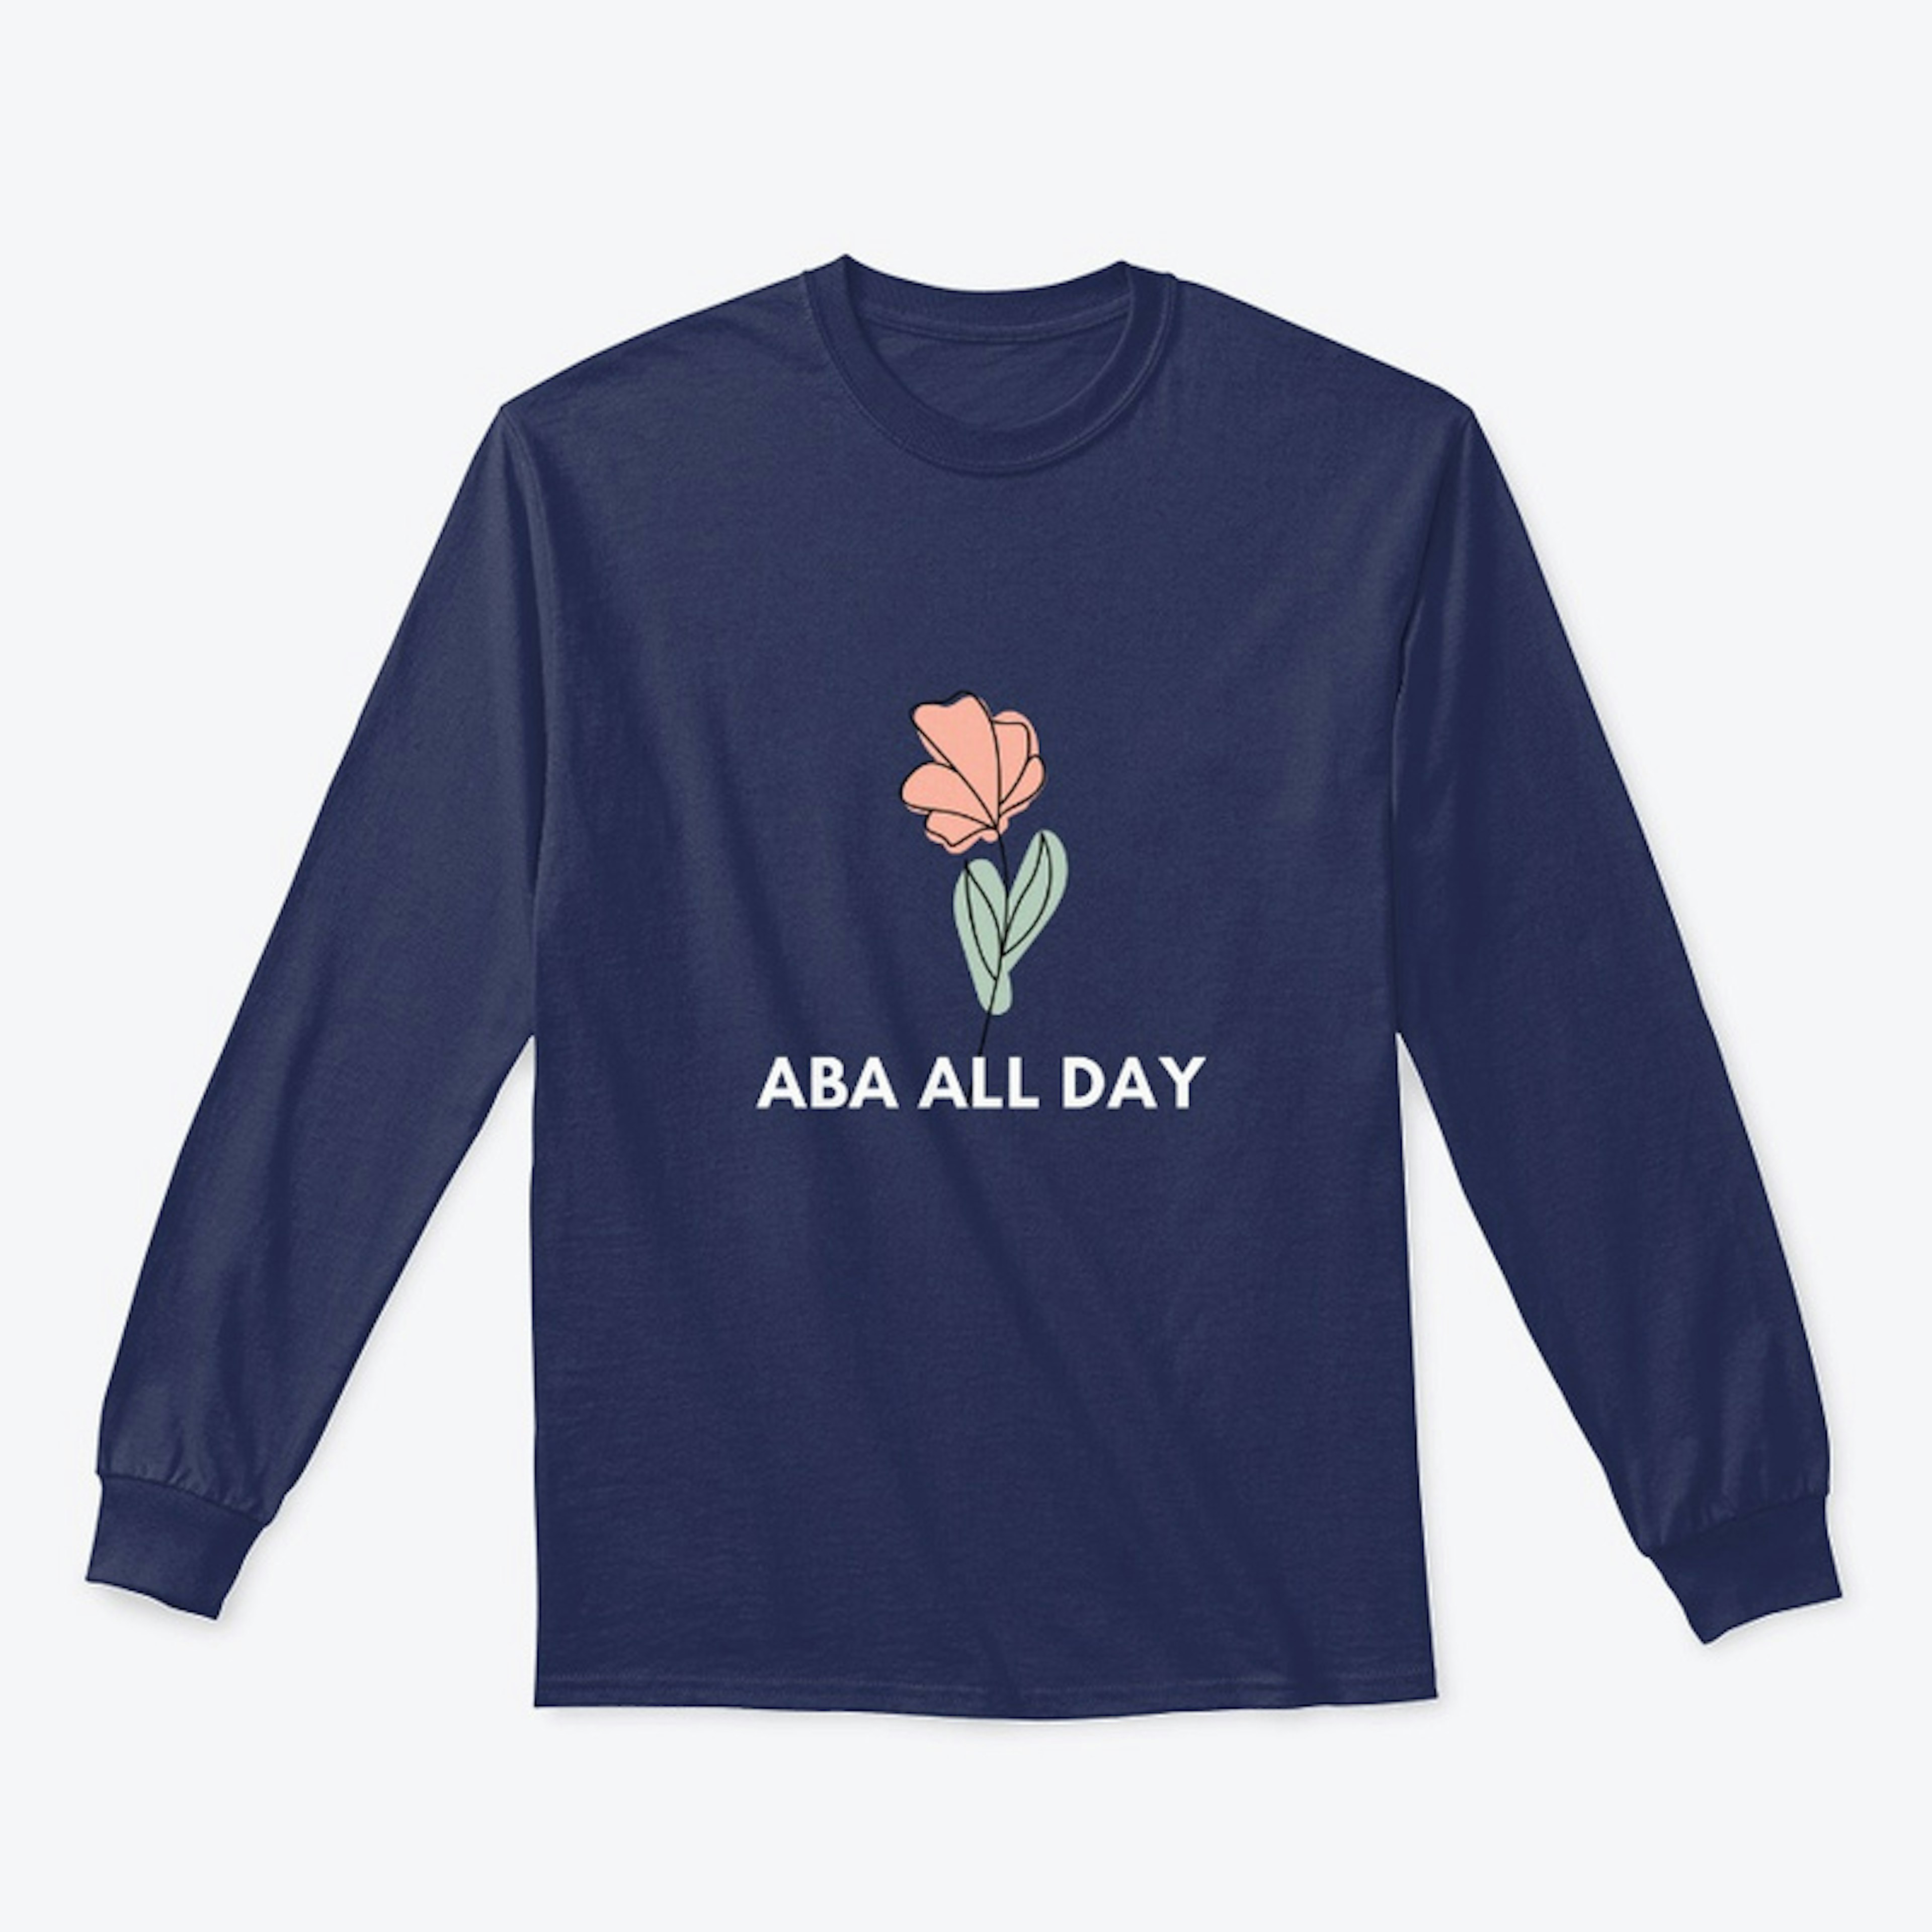 ABA All Day - white text